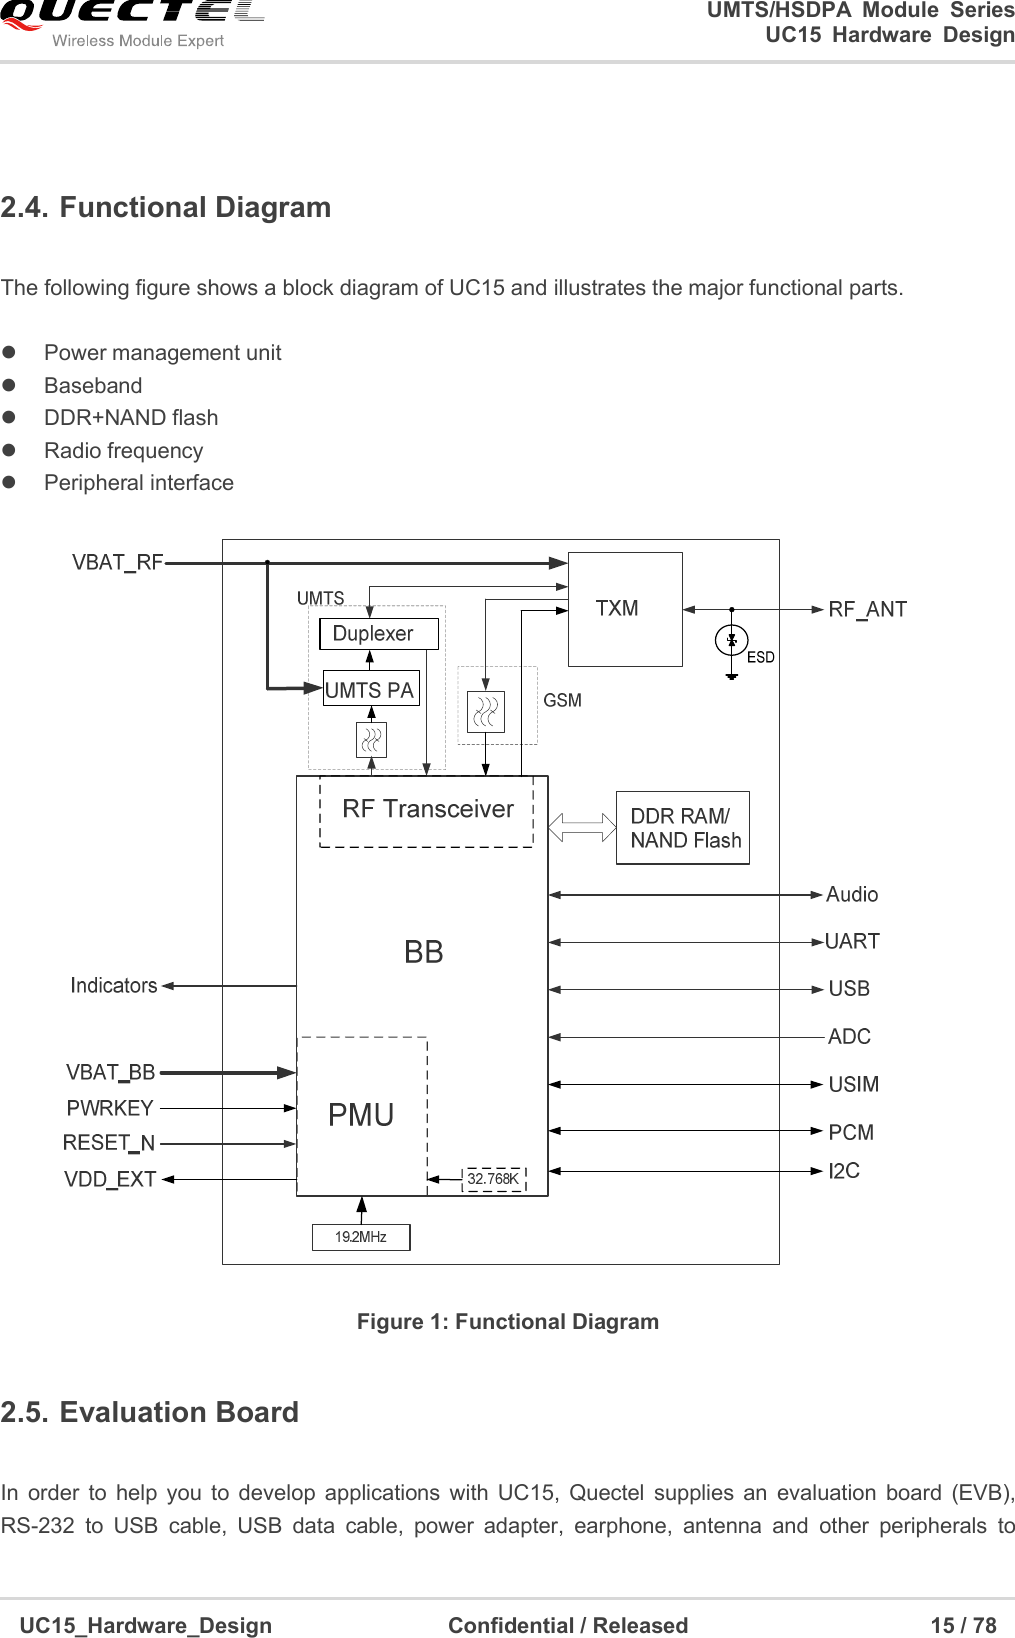                                                                        UMTS/HSDPA  Module  Series                                                                 UC15 Hardware Design  UC15_Hardware_Design                                Confidential / Released                                            15 / 78     2.4. Functional Diagram    The following figure shows a block diagram of UC15 and illustrates the major functional parts.      Power management unit   Baseband   DDR+NAND flash   Radio frequency     Peripheral interface  Figure 1: Functional Diagram 2.5. Evaluation Board    In  order  to  help  you  to  develop  applications  with  UC15,  Quectel  supplies  an  evaluation  board  (EVB), RS-232  to  USB  cable,  USB  data  cable,  power  adapter,  earphone,  antenna  and  other  peripherals  to 